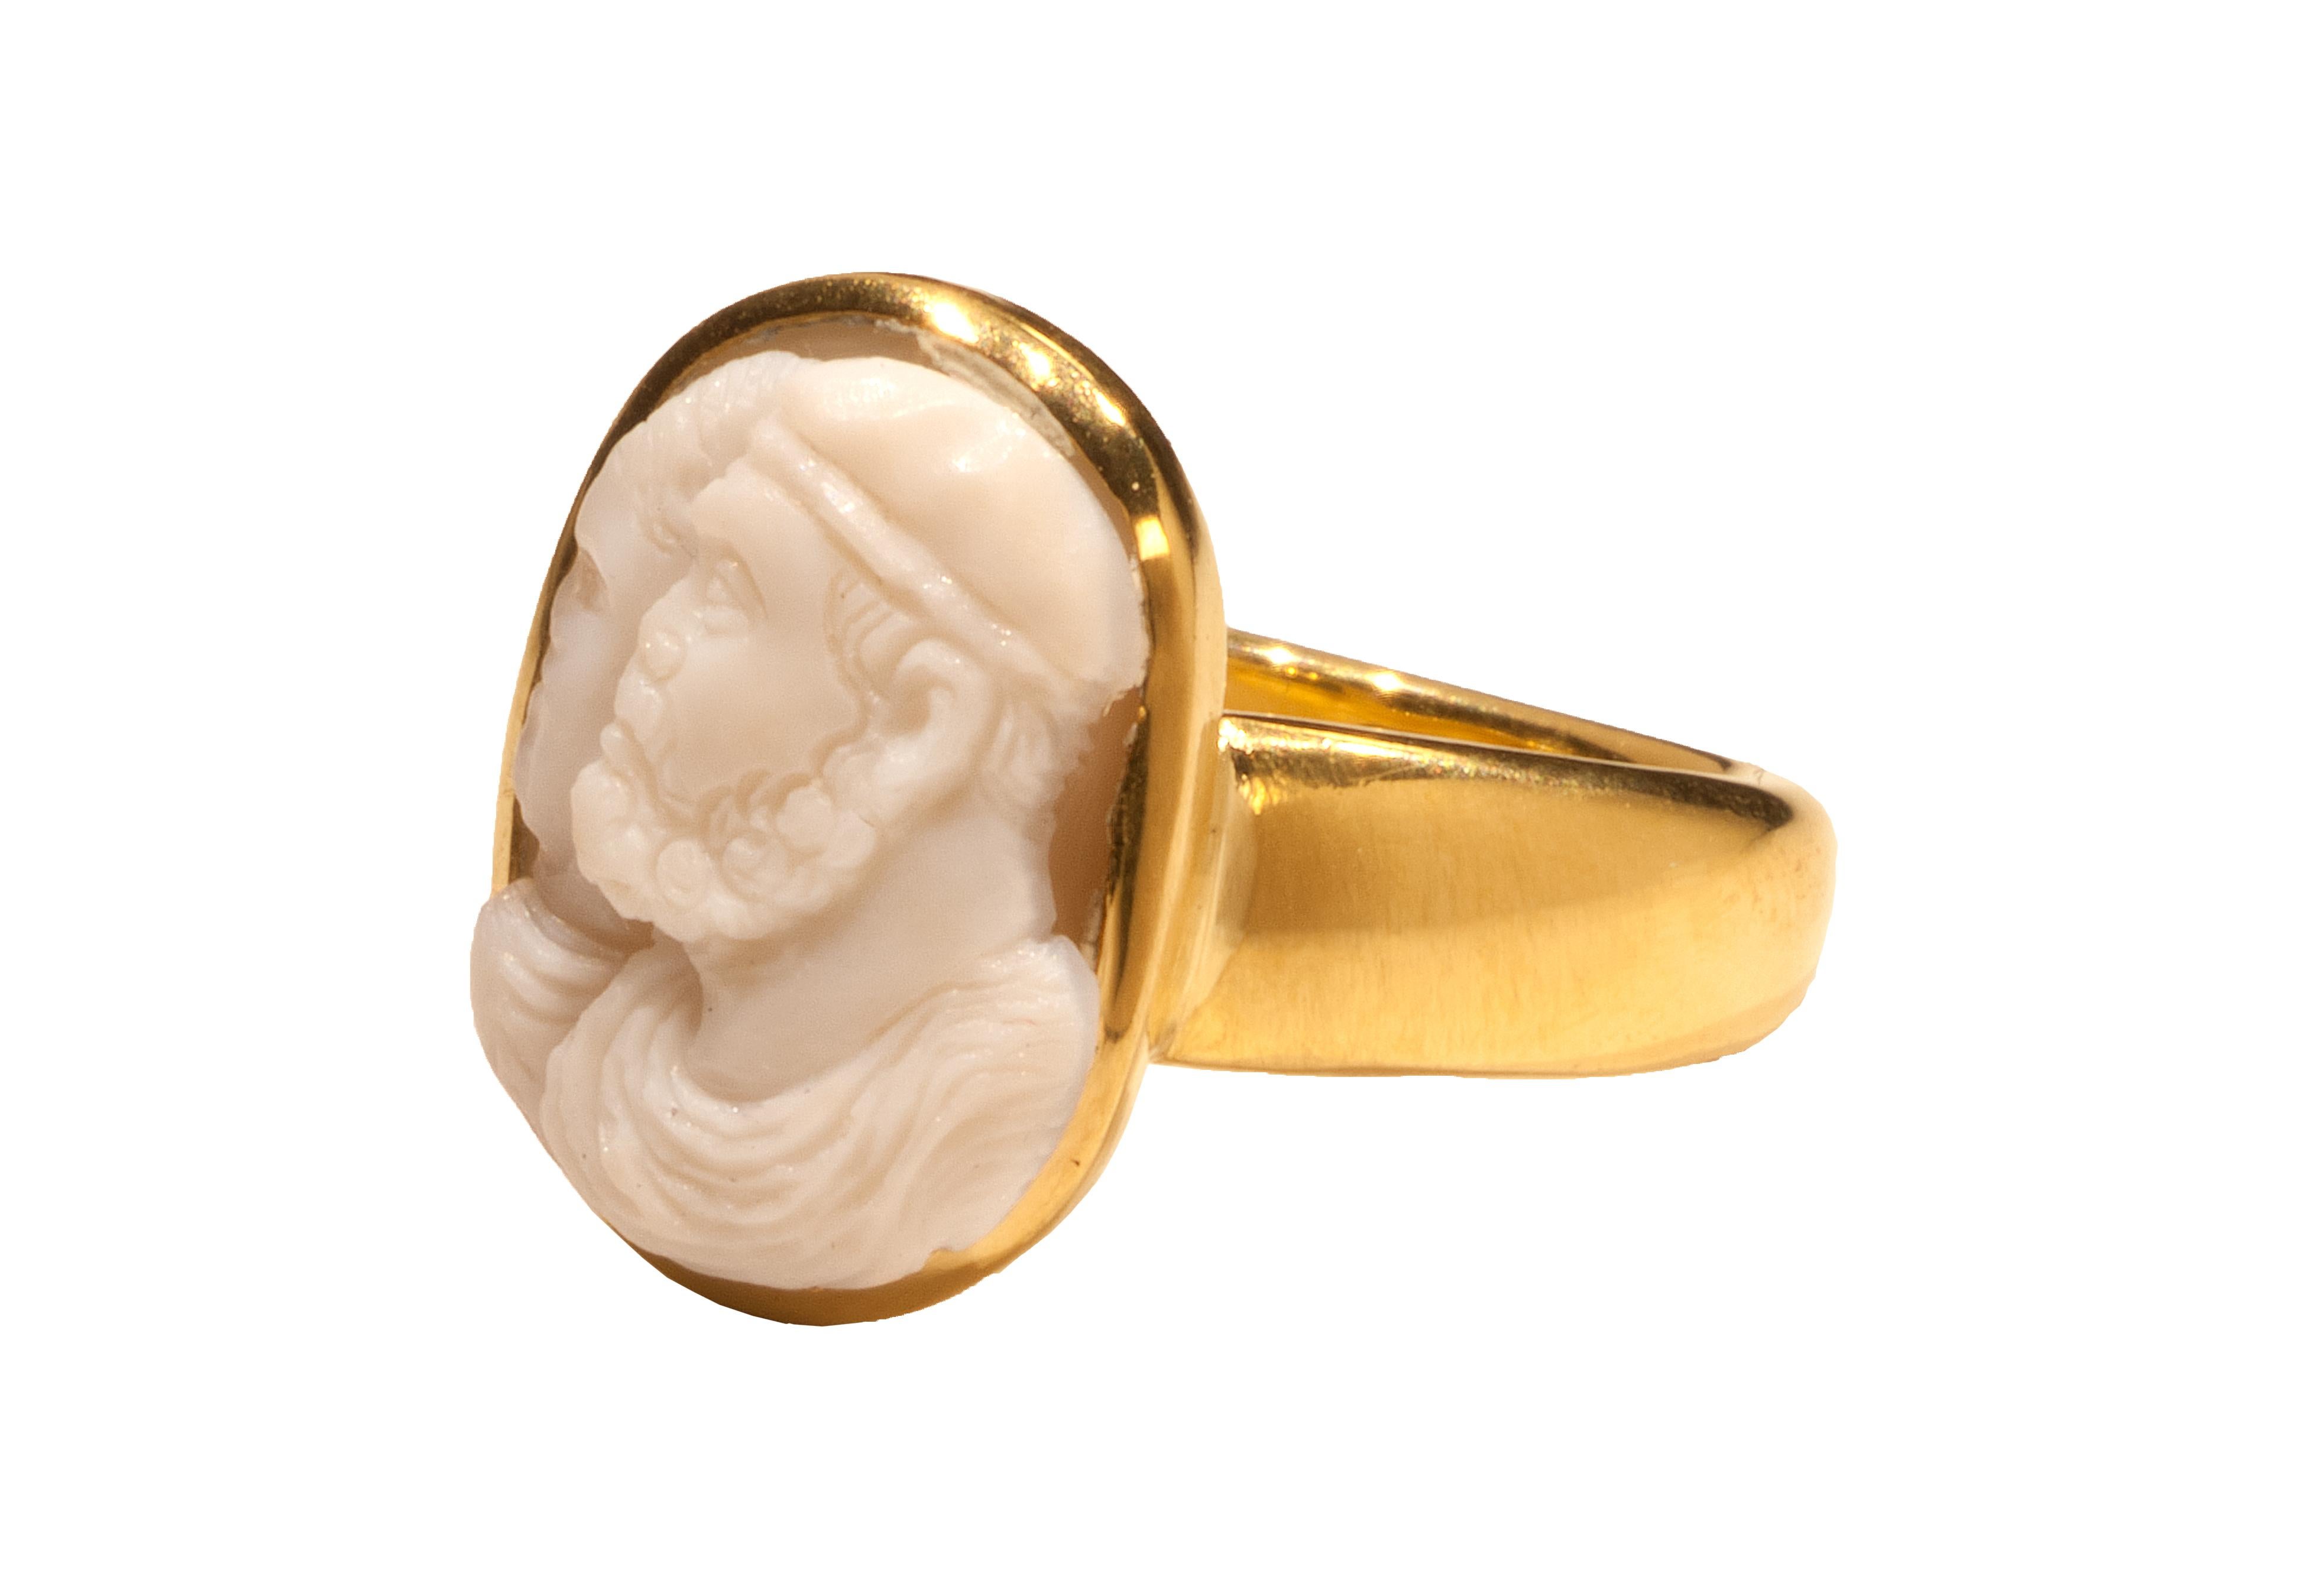 RENAISSANCE MARRIAGE PORTRAIT CAMEO IN MODERN GOLD SETTING
Italy (?), 16th-17th century
White agate, modern gold setting
Weight: 10.8 g.; circumference: 54.4 mm.; size: US 7, UK N ½

Substantial rounded D-section hoop, narrowing at the base supports